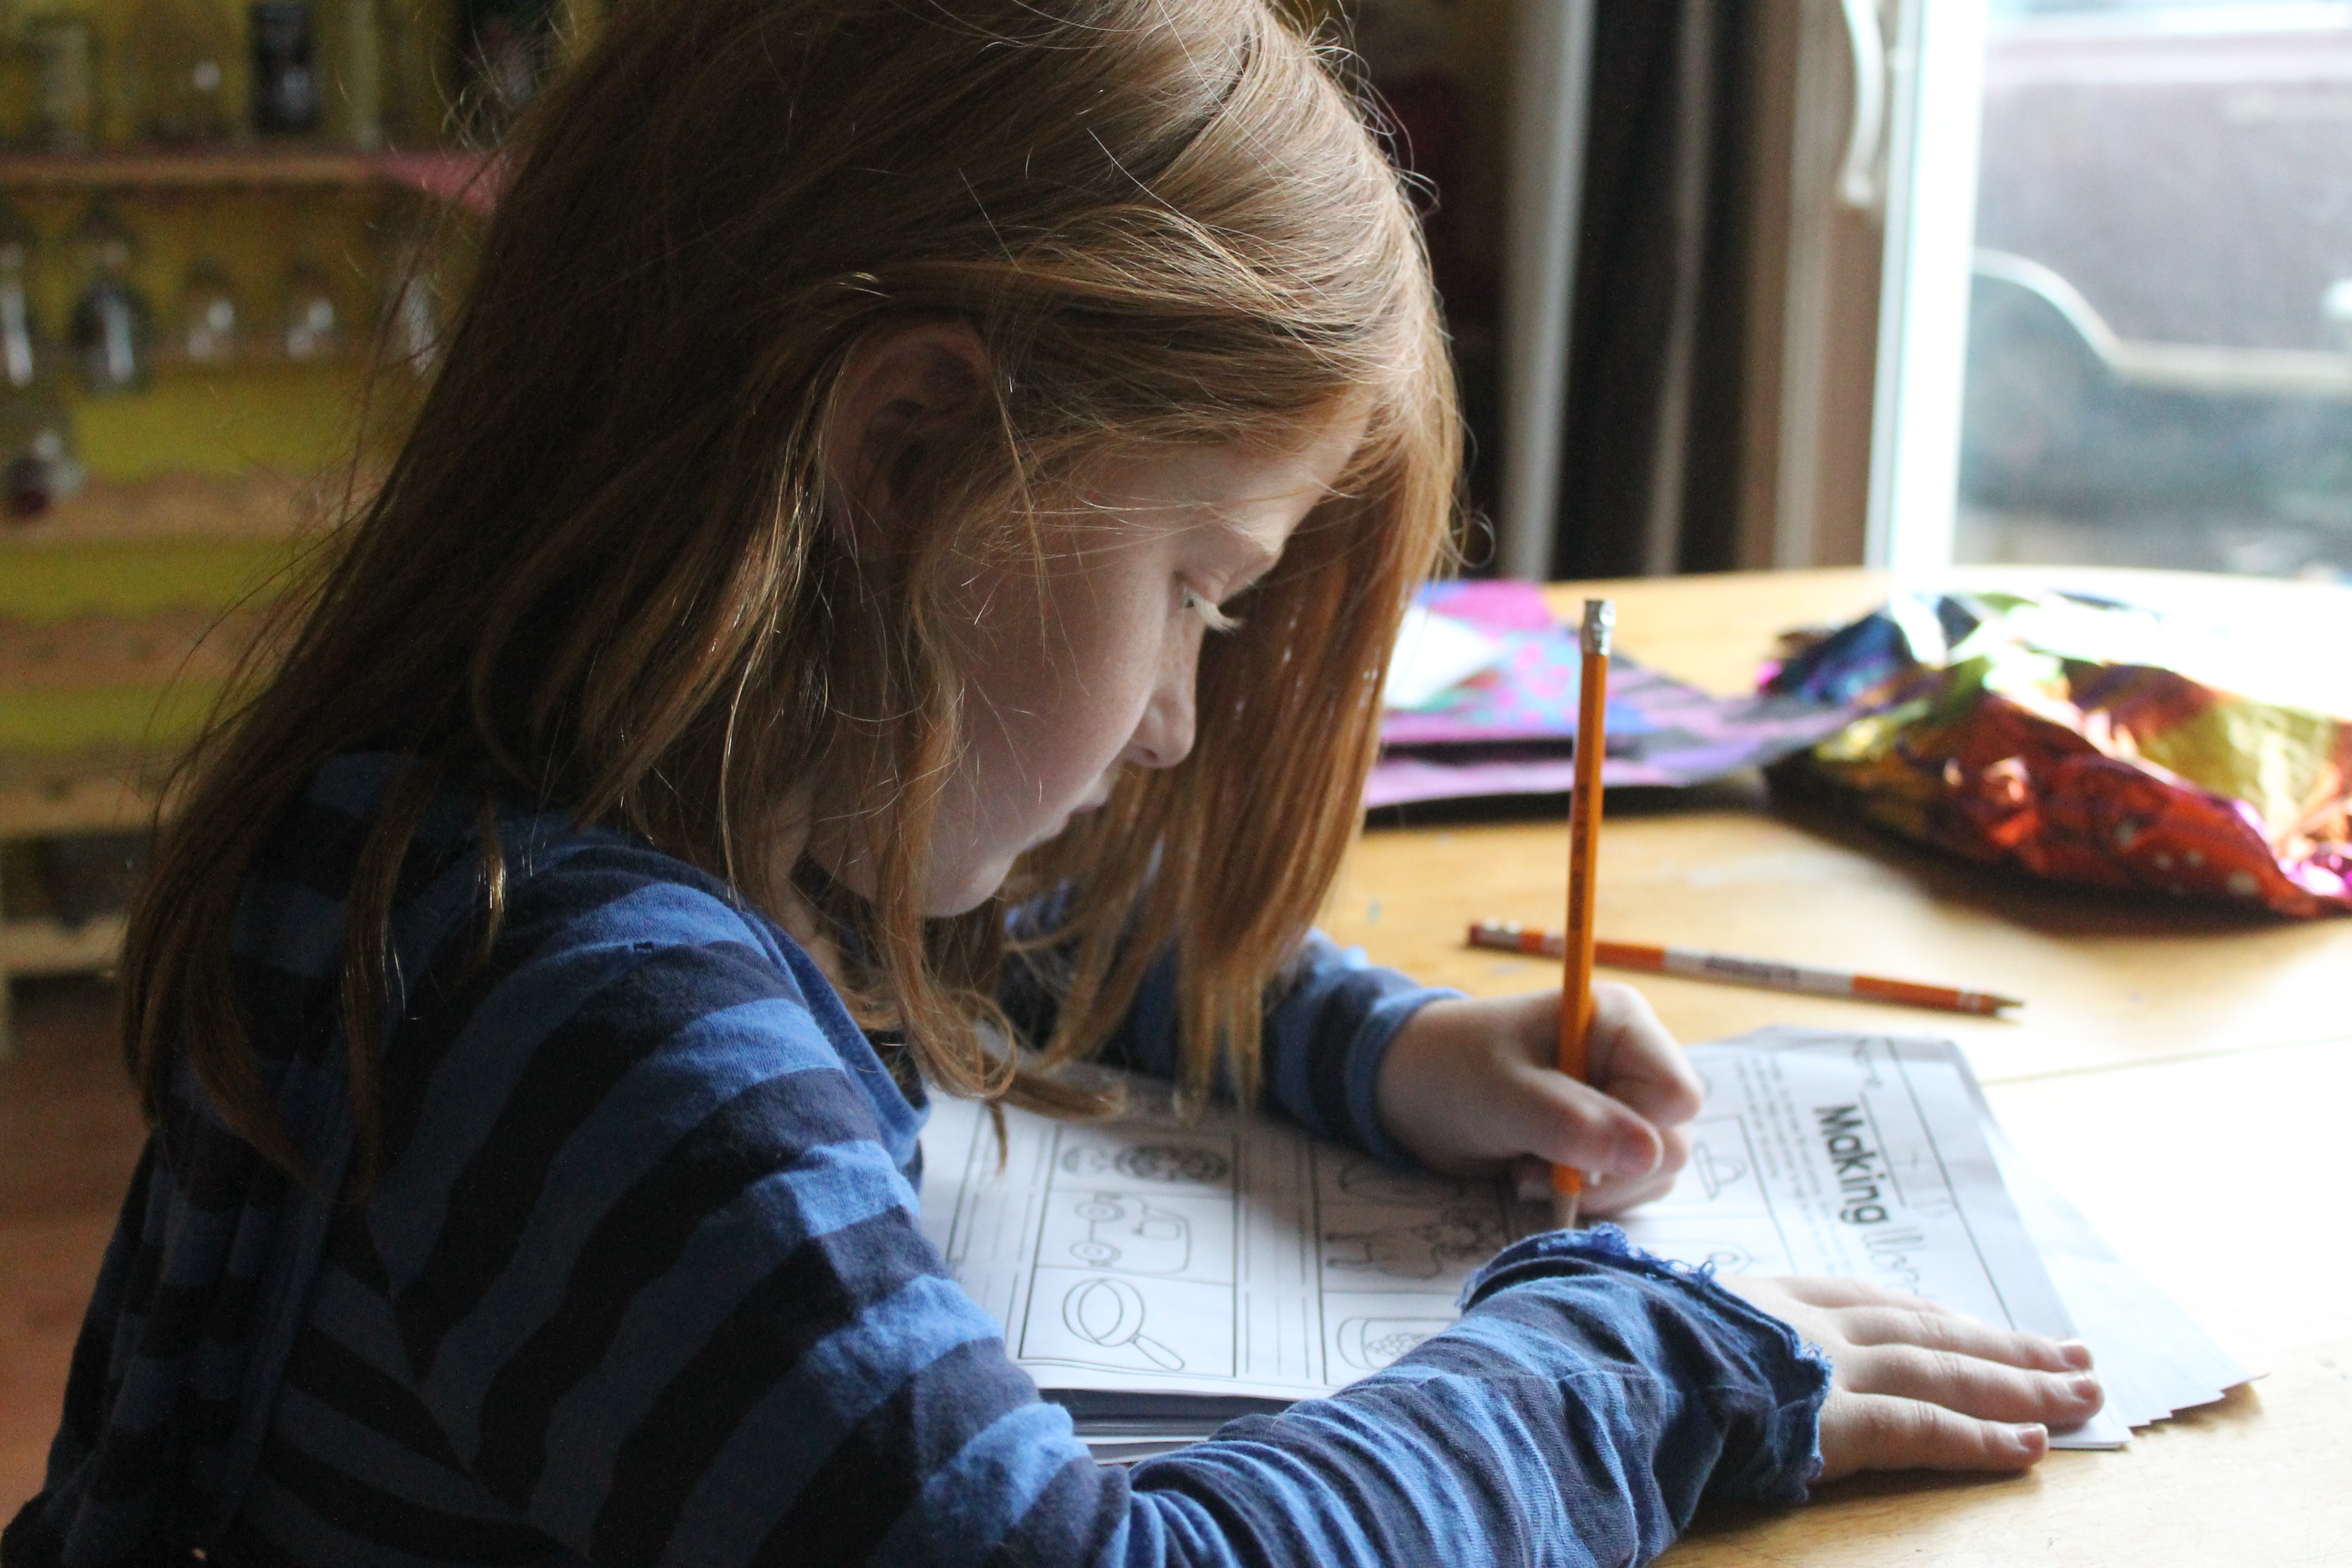 how to help autistic child with homework